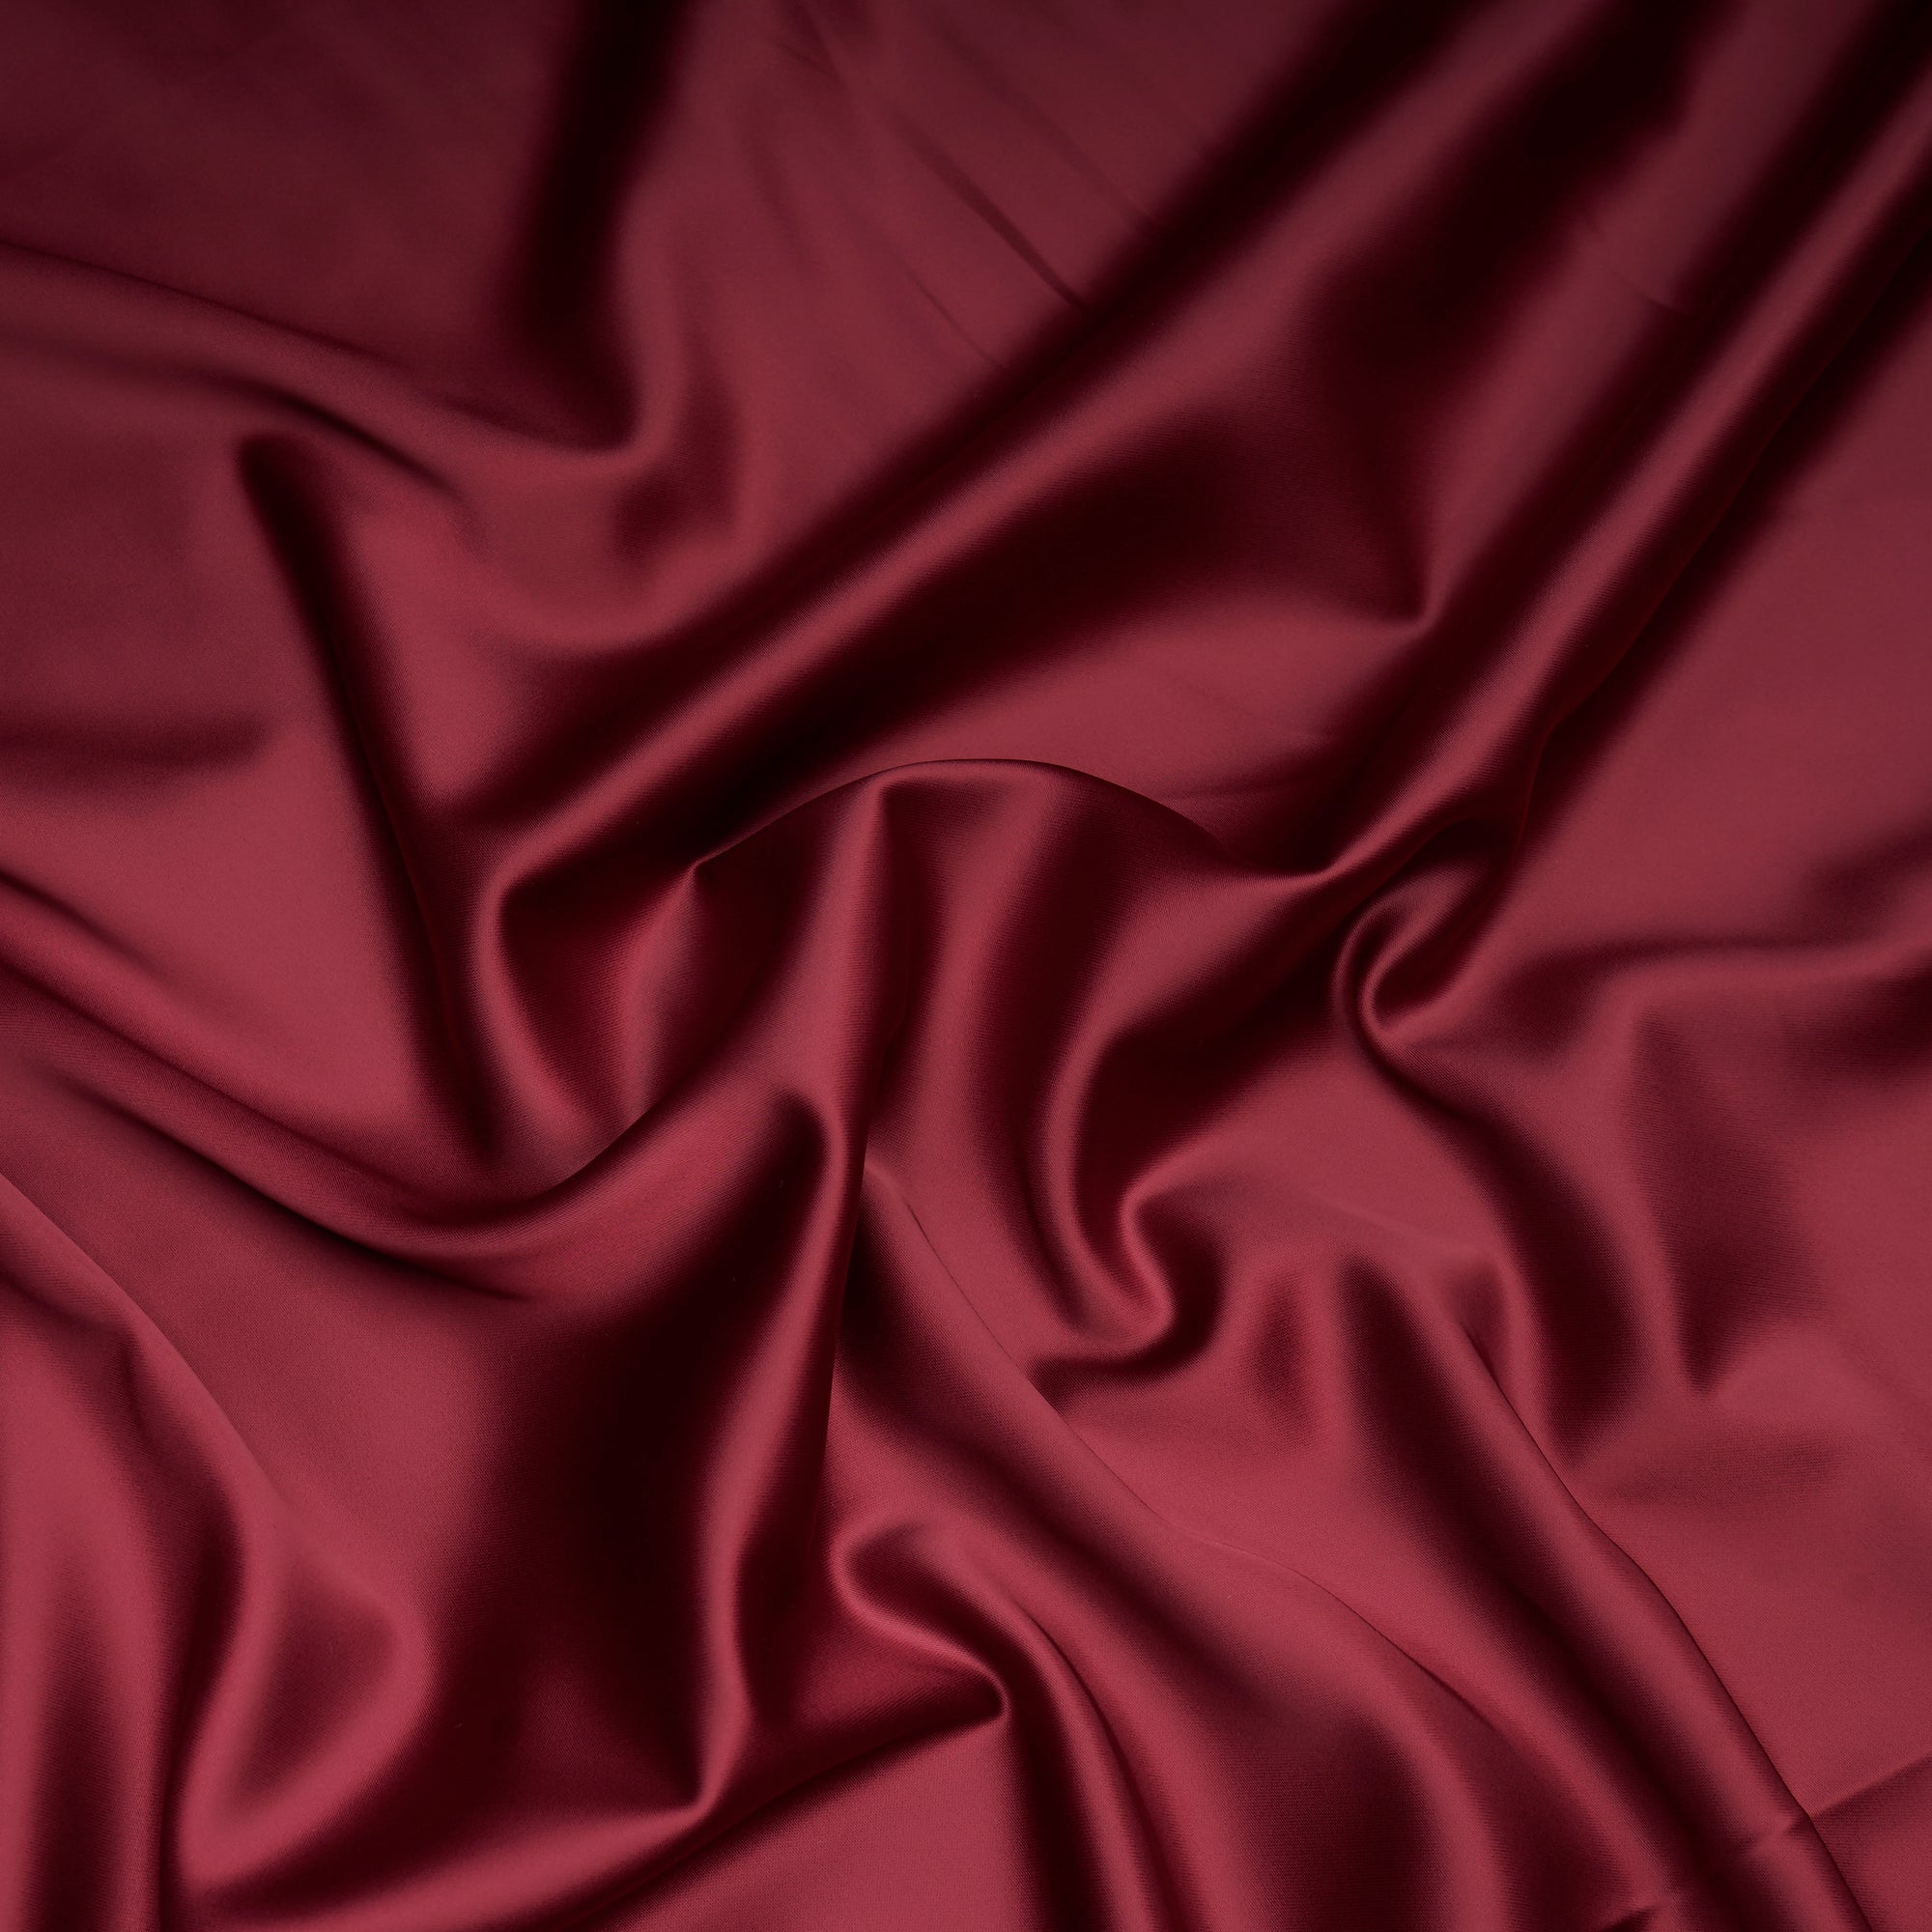 Sun-Dried Tomato Solid Dyed Imported Duchess Satin Fabric (60" Width)